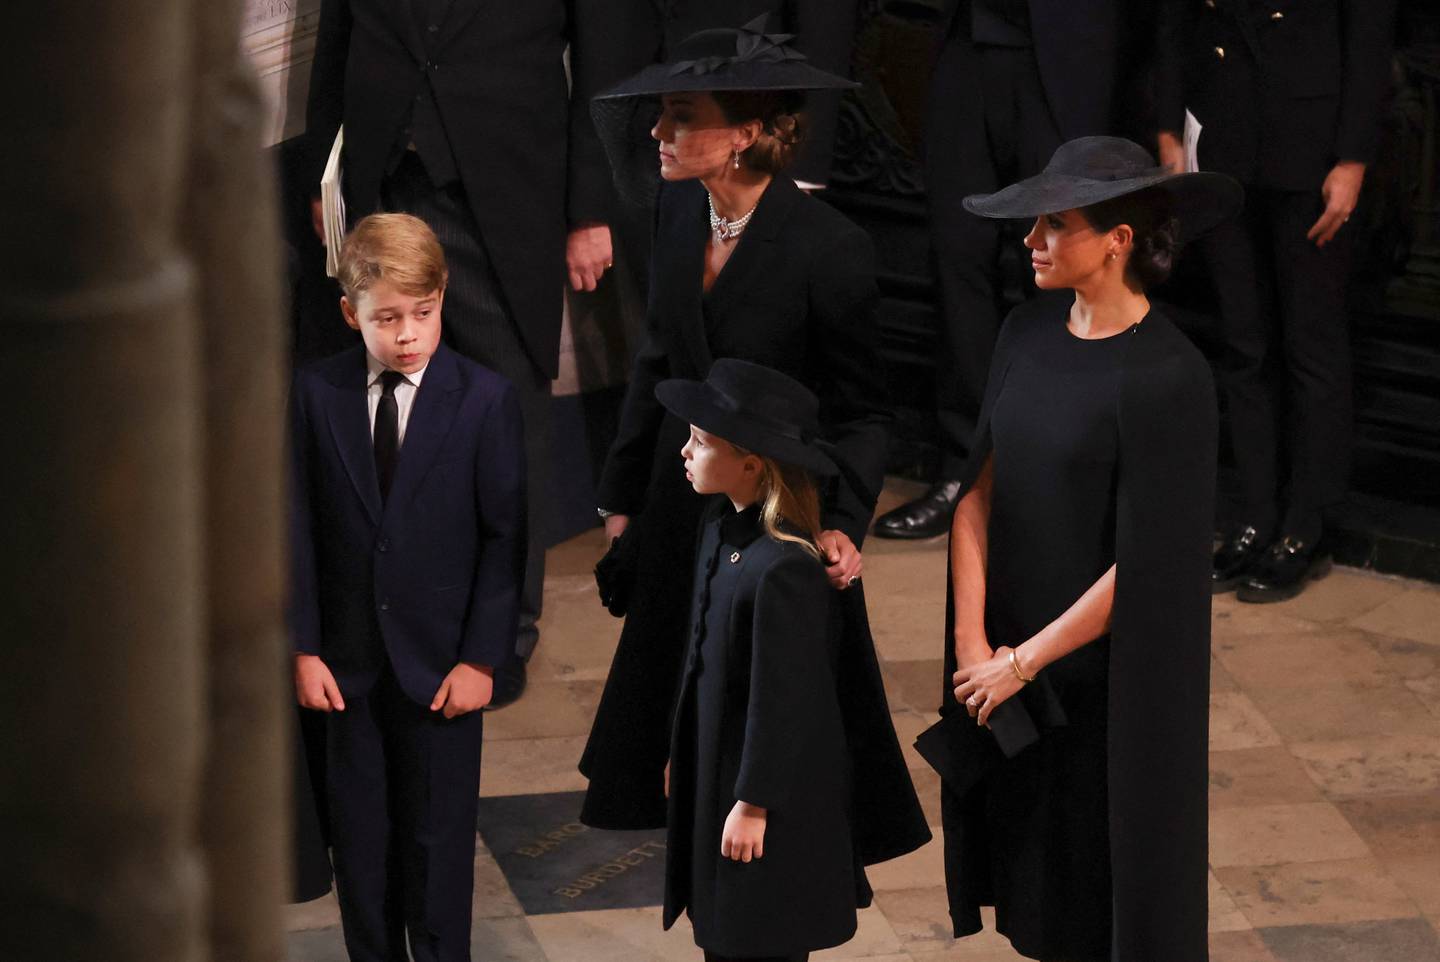 Prince George, Princess Charlotte, the Princess of Wales, and the Duchess of Sussex stand together during the funeral of Queen Elizabeth II. PA News